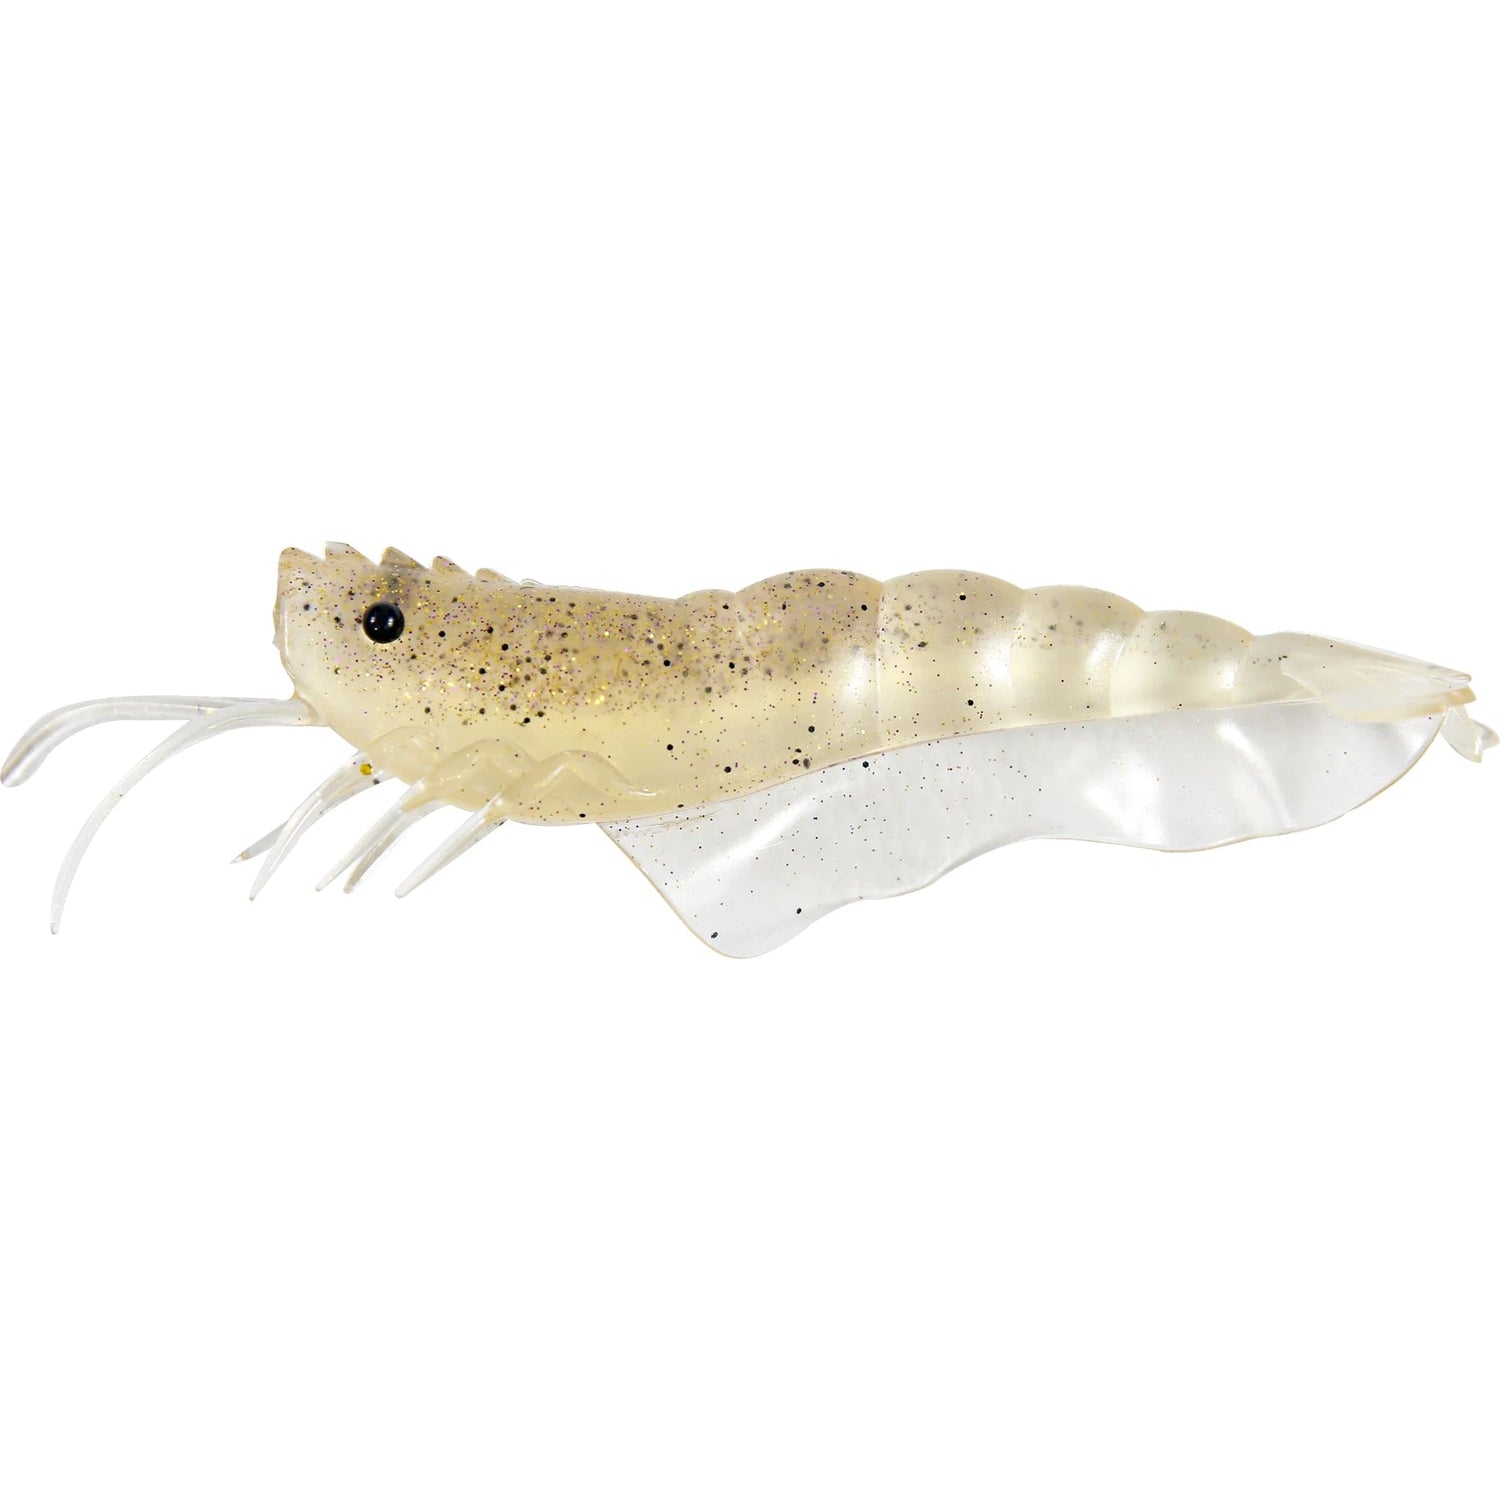 Quick Look at the Pro Lure Clone Prawn in stock Full Range and